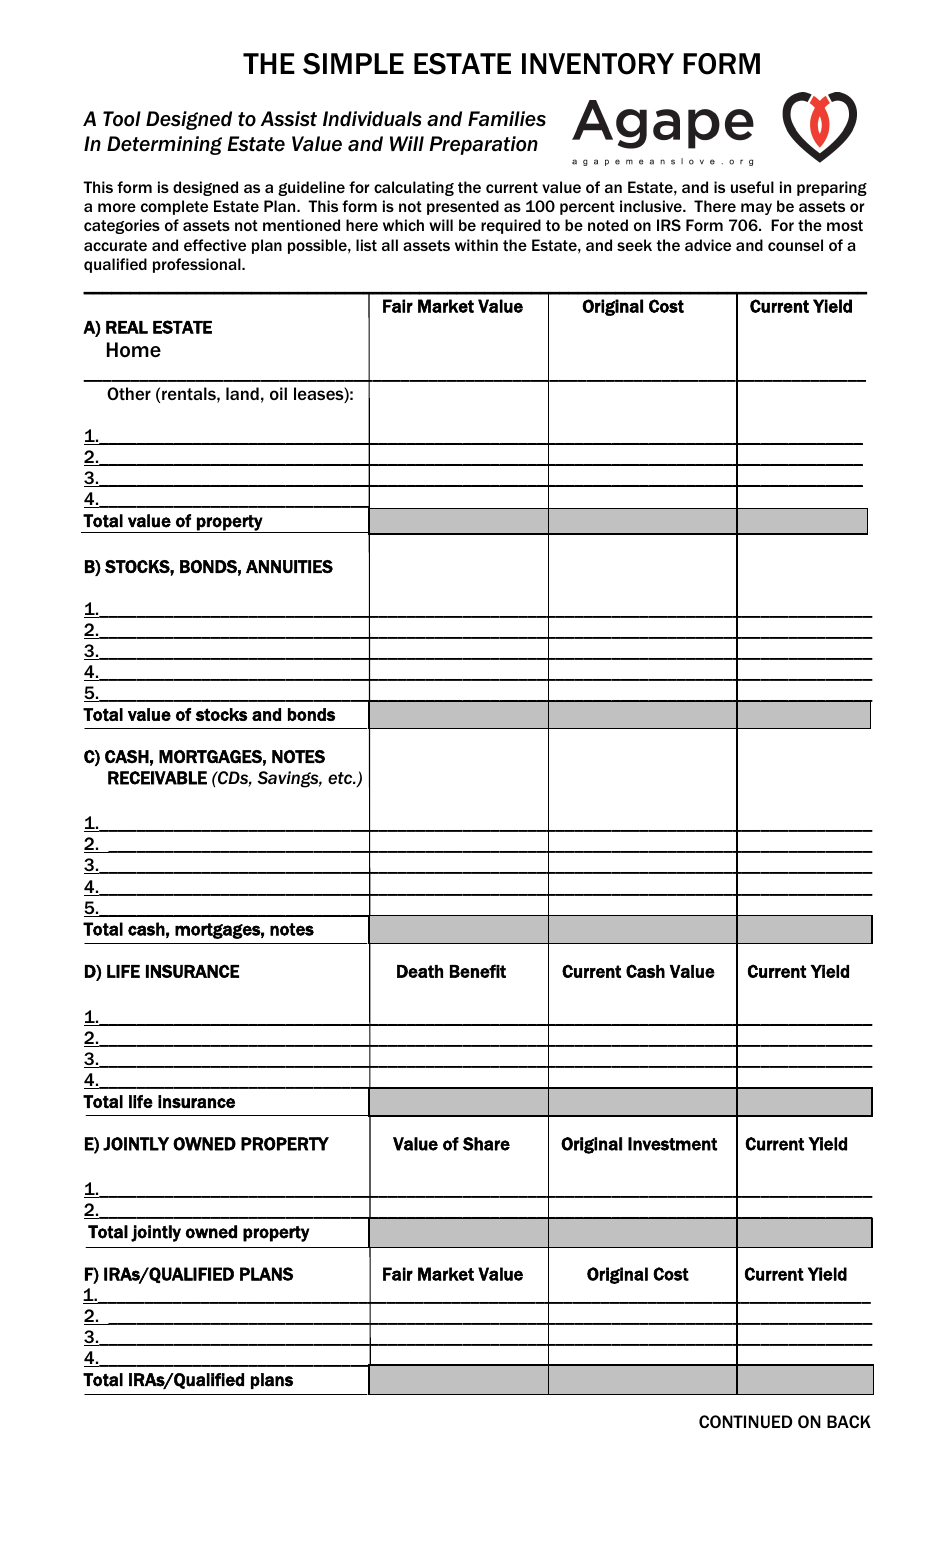 The Simple Estate Inventory Form - Agape, Page 1